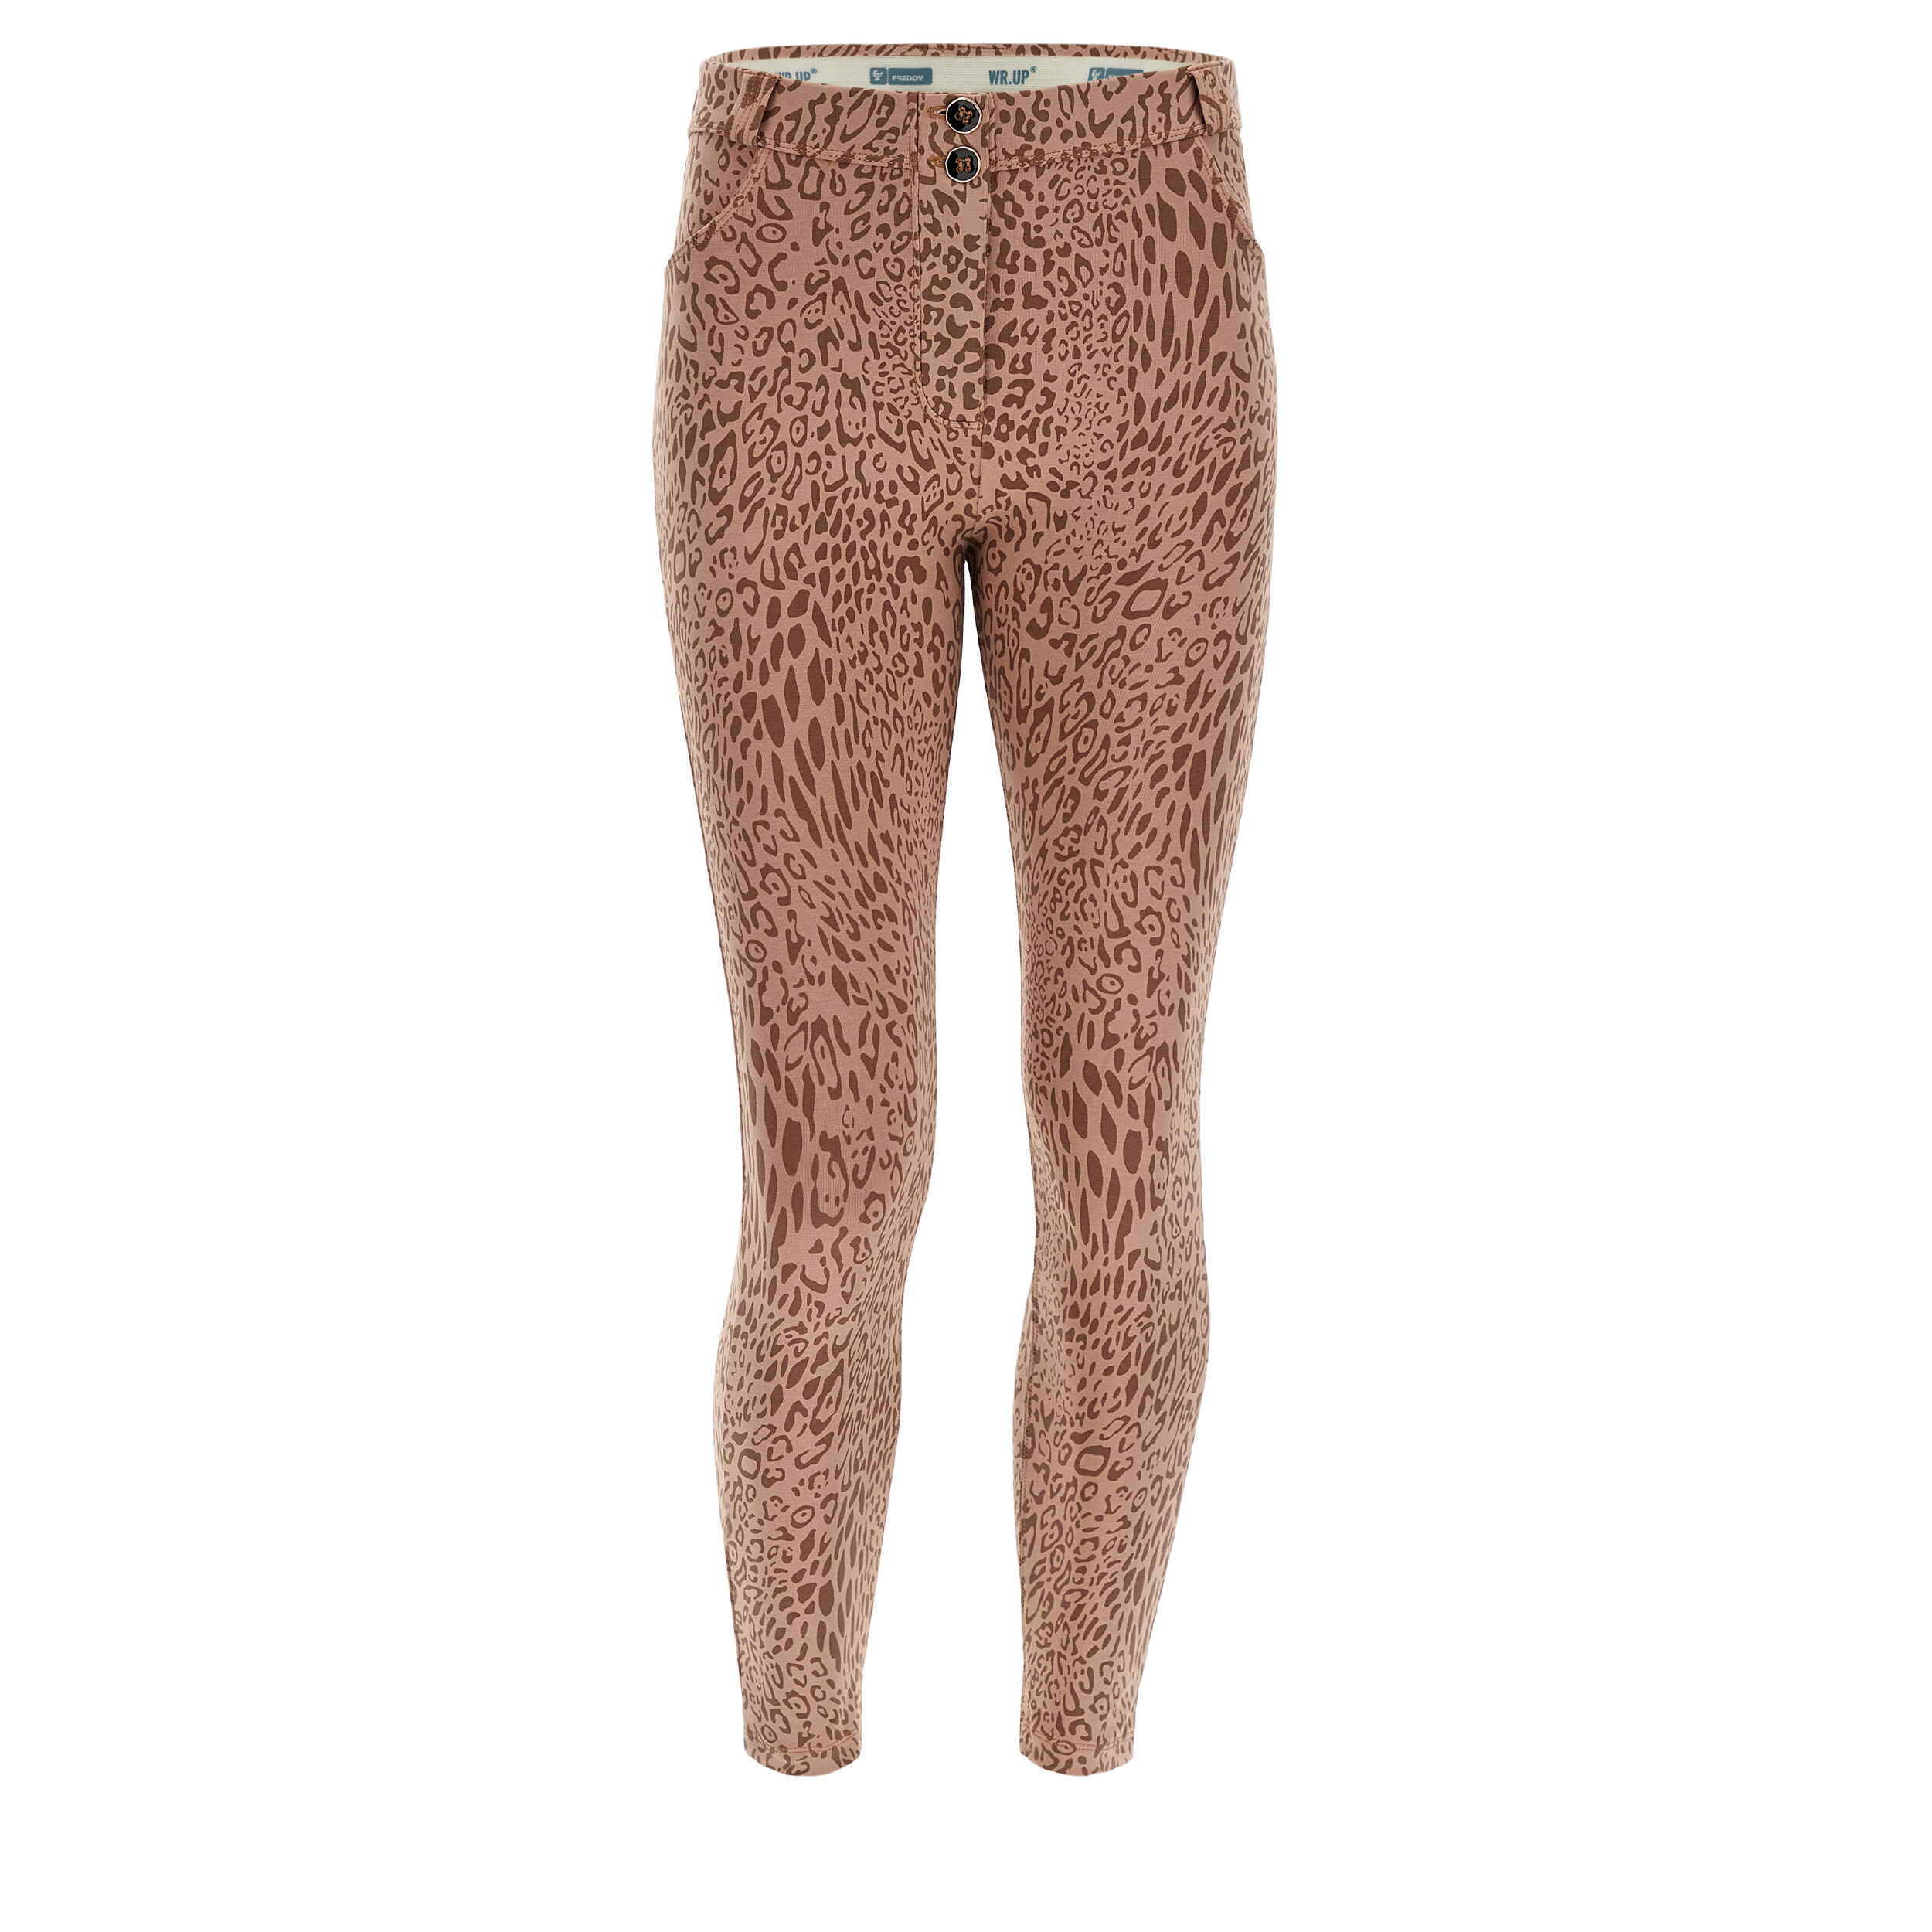 Freddy Pantaloni WR.UP® vita alta in cotone stampato animalier Animalier Allover Pink Dyed Donna Extra Small